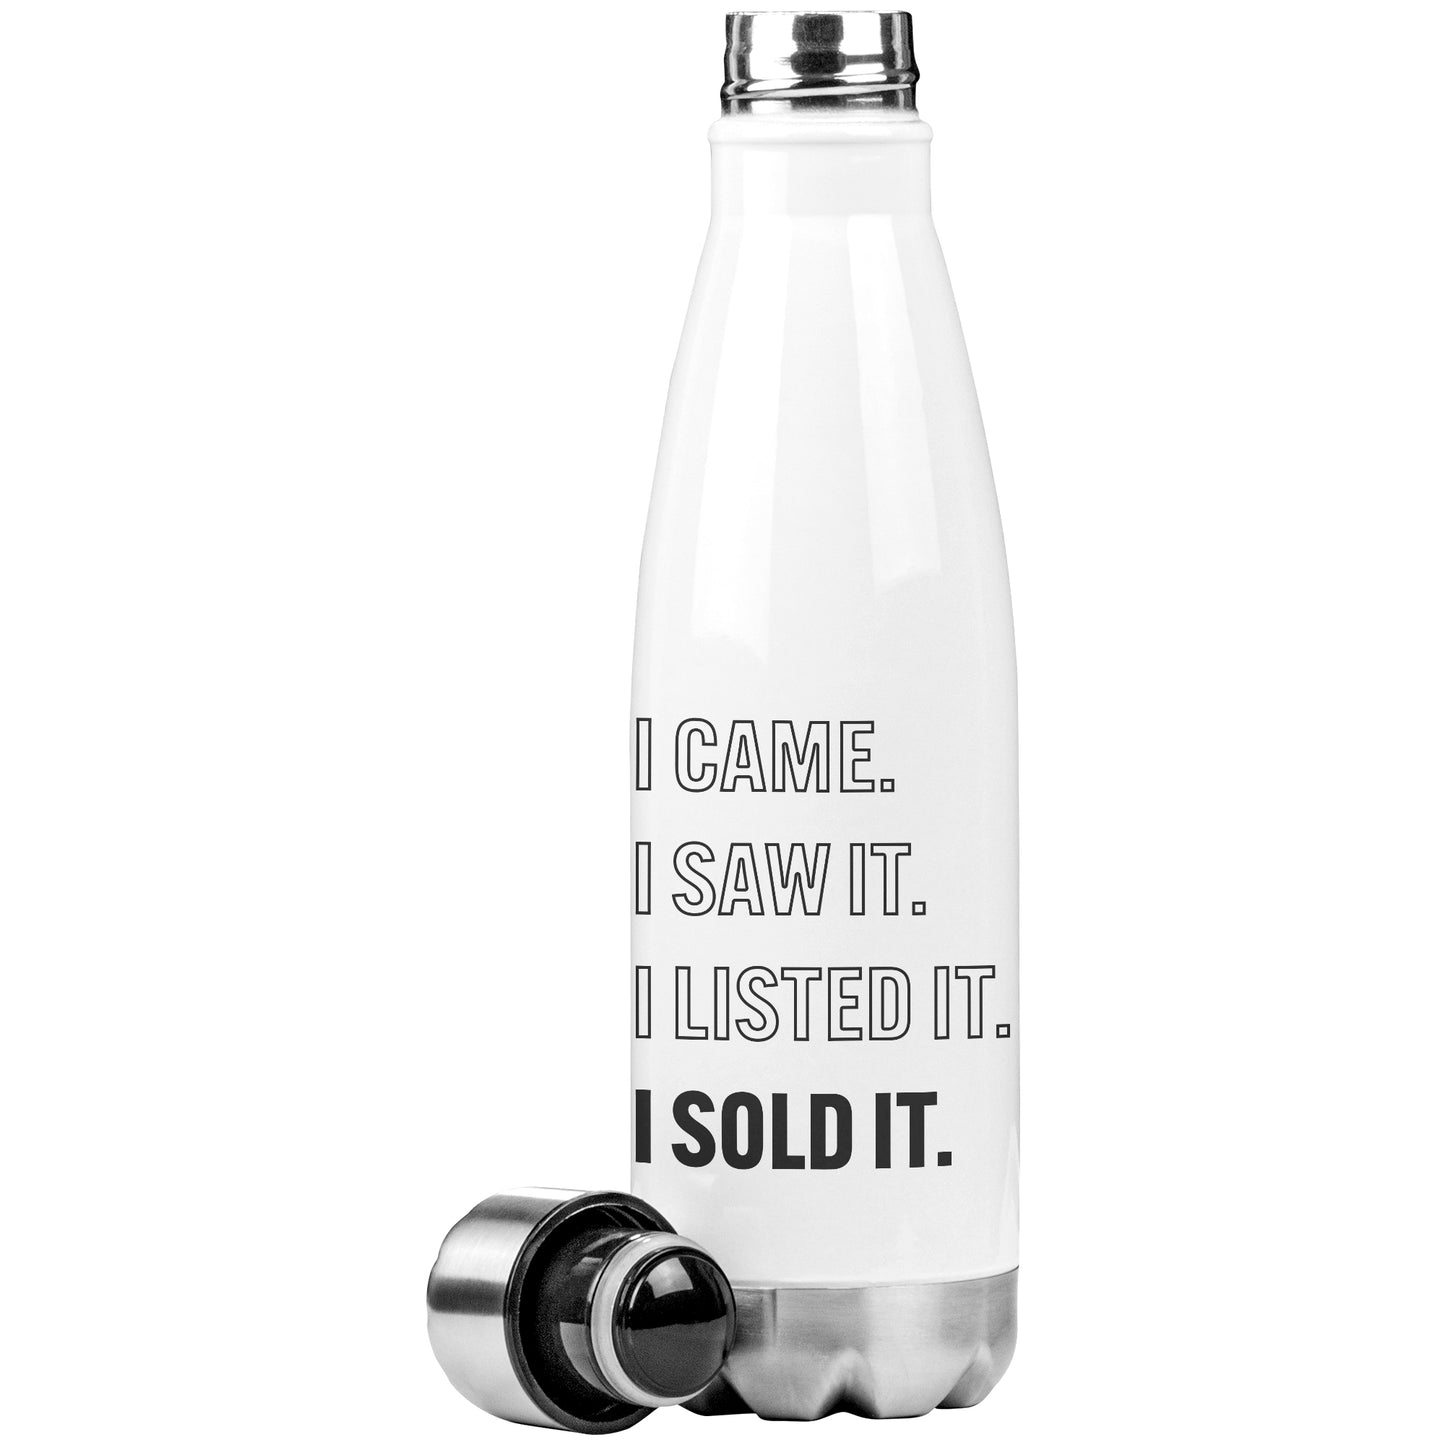 I Came I Saw It I Listed I Sold It Insulated Water Bottle 20oz